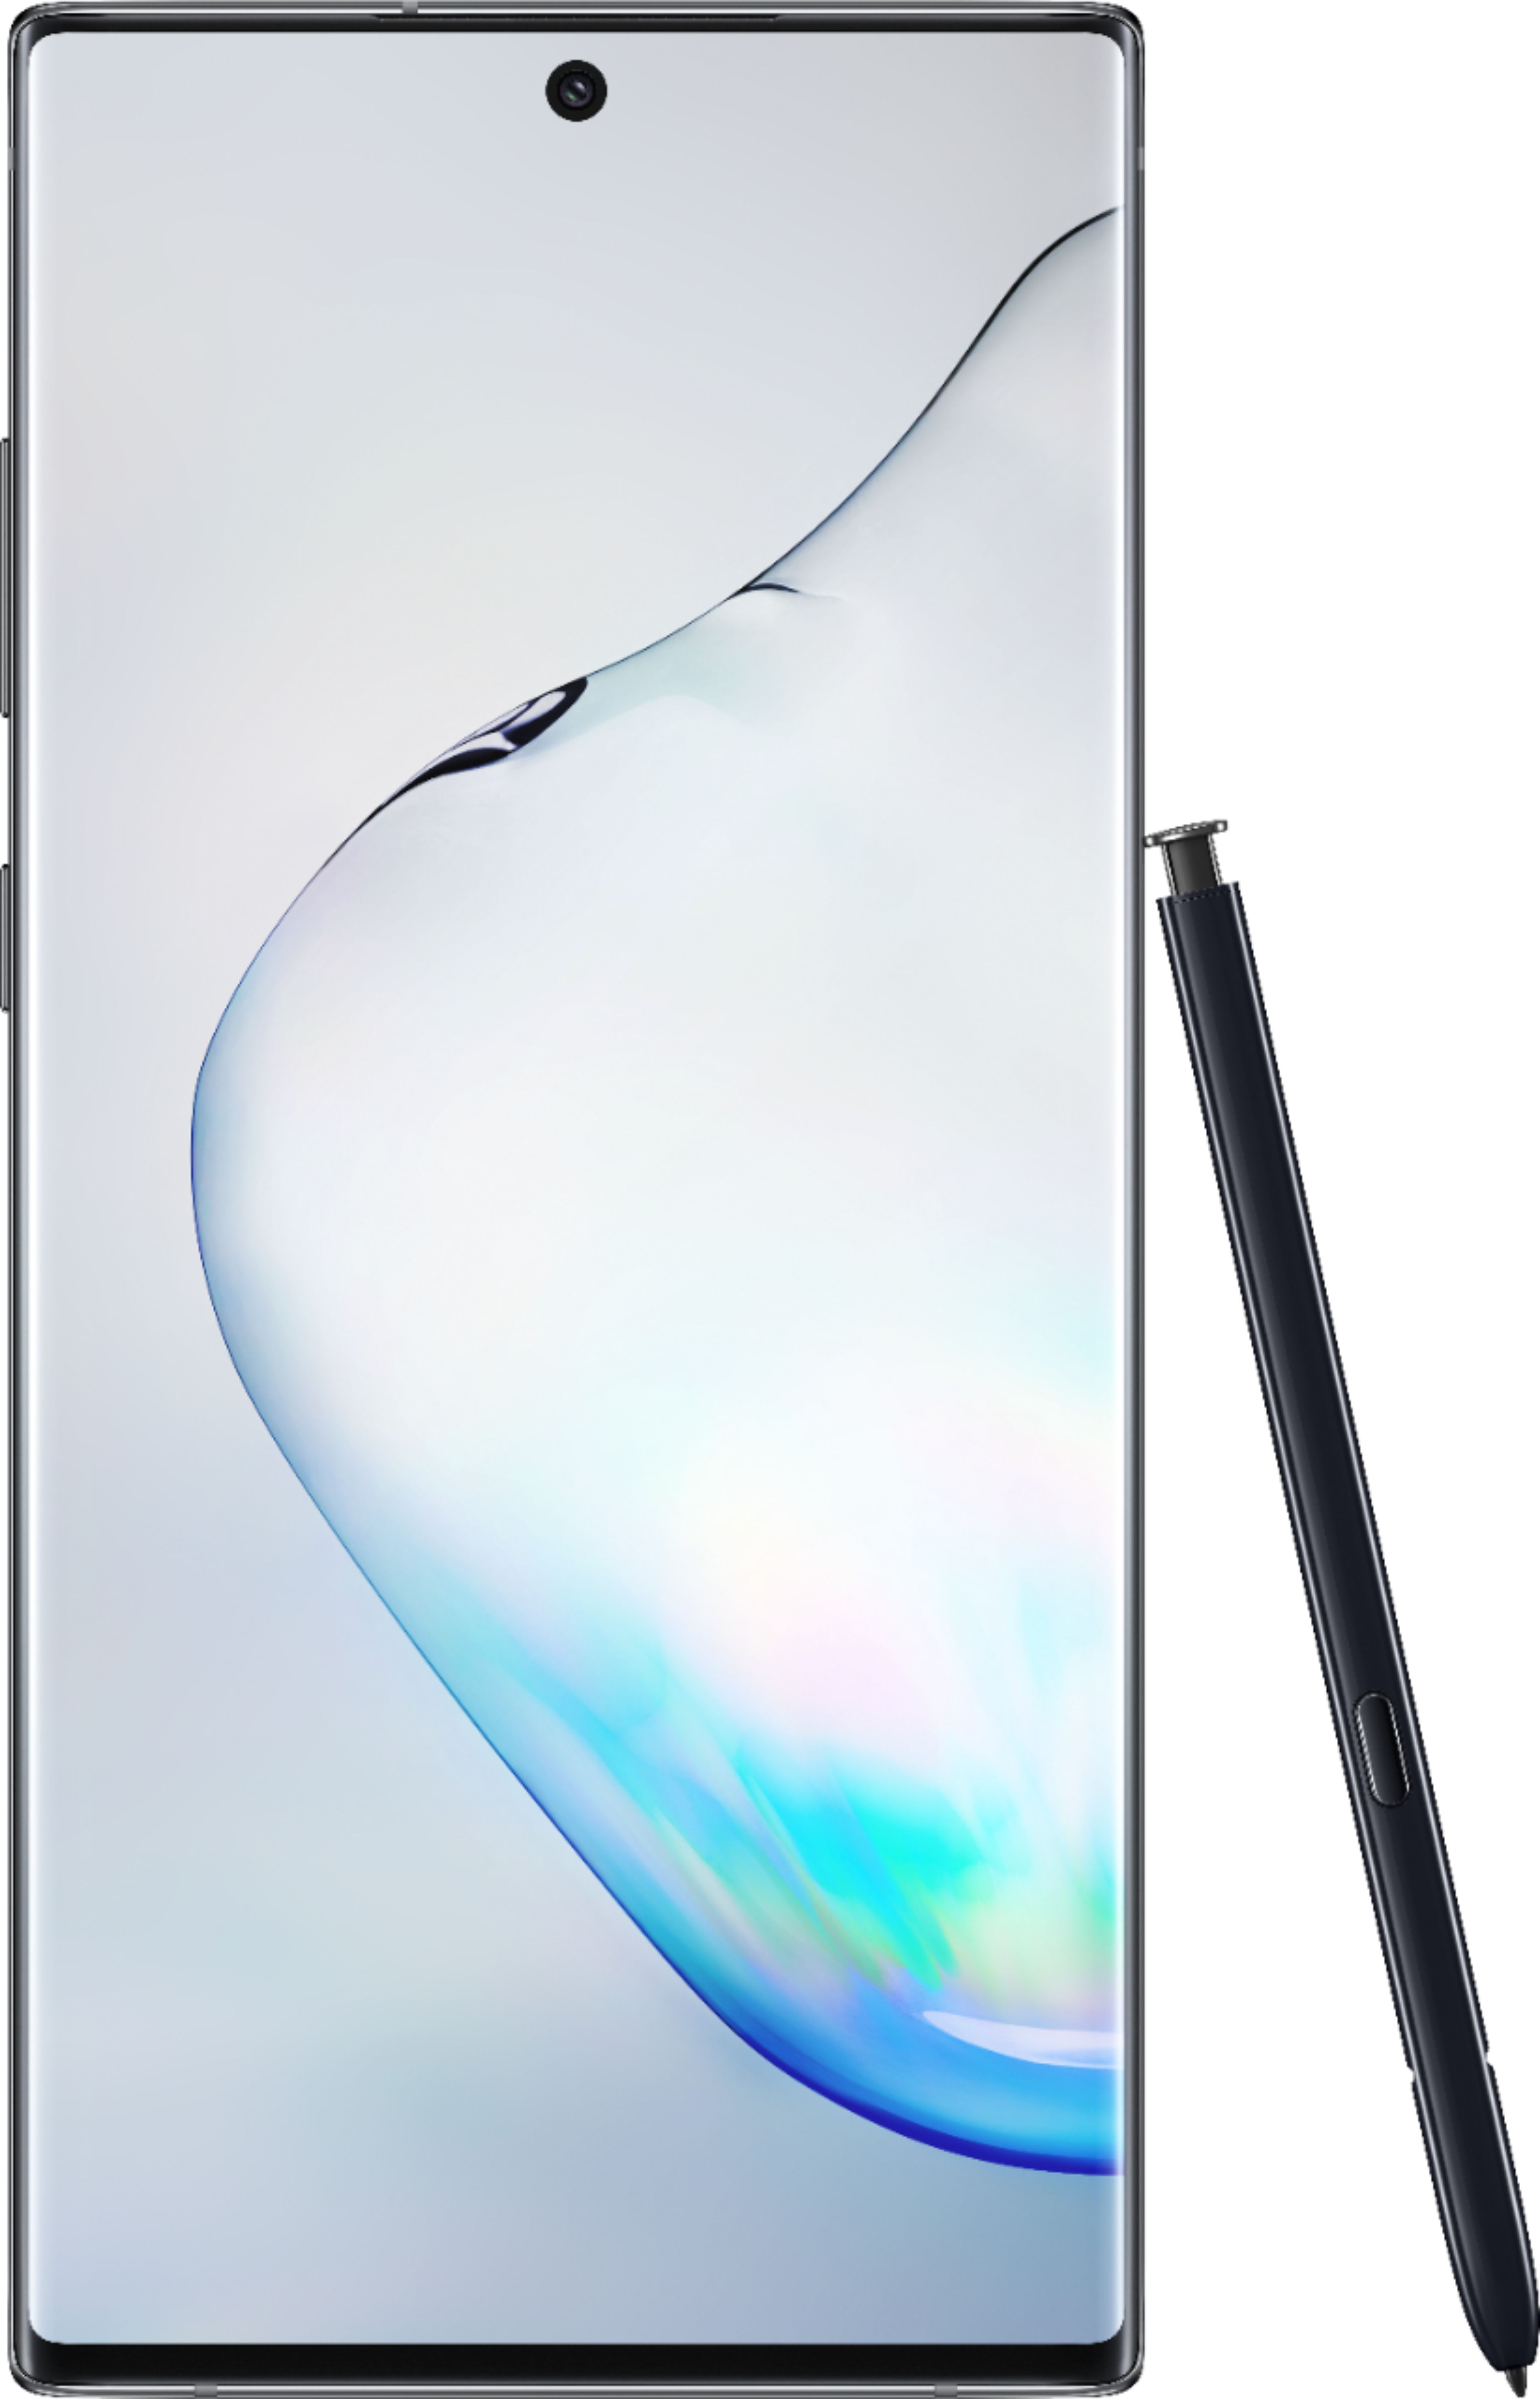  Samsung Galaxy Note 10+ Plus 256GB with S Pen Aura Glow/Silver  (Factory Unlocked for GSM & CDMA, 6.8 Inch Display, U.S. Warranty)  SM-N975UZKAXAA : Everything Else